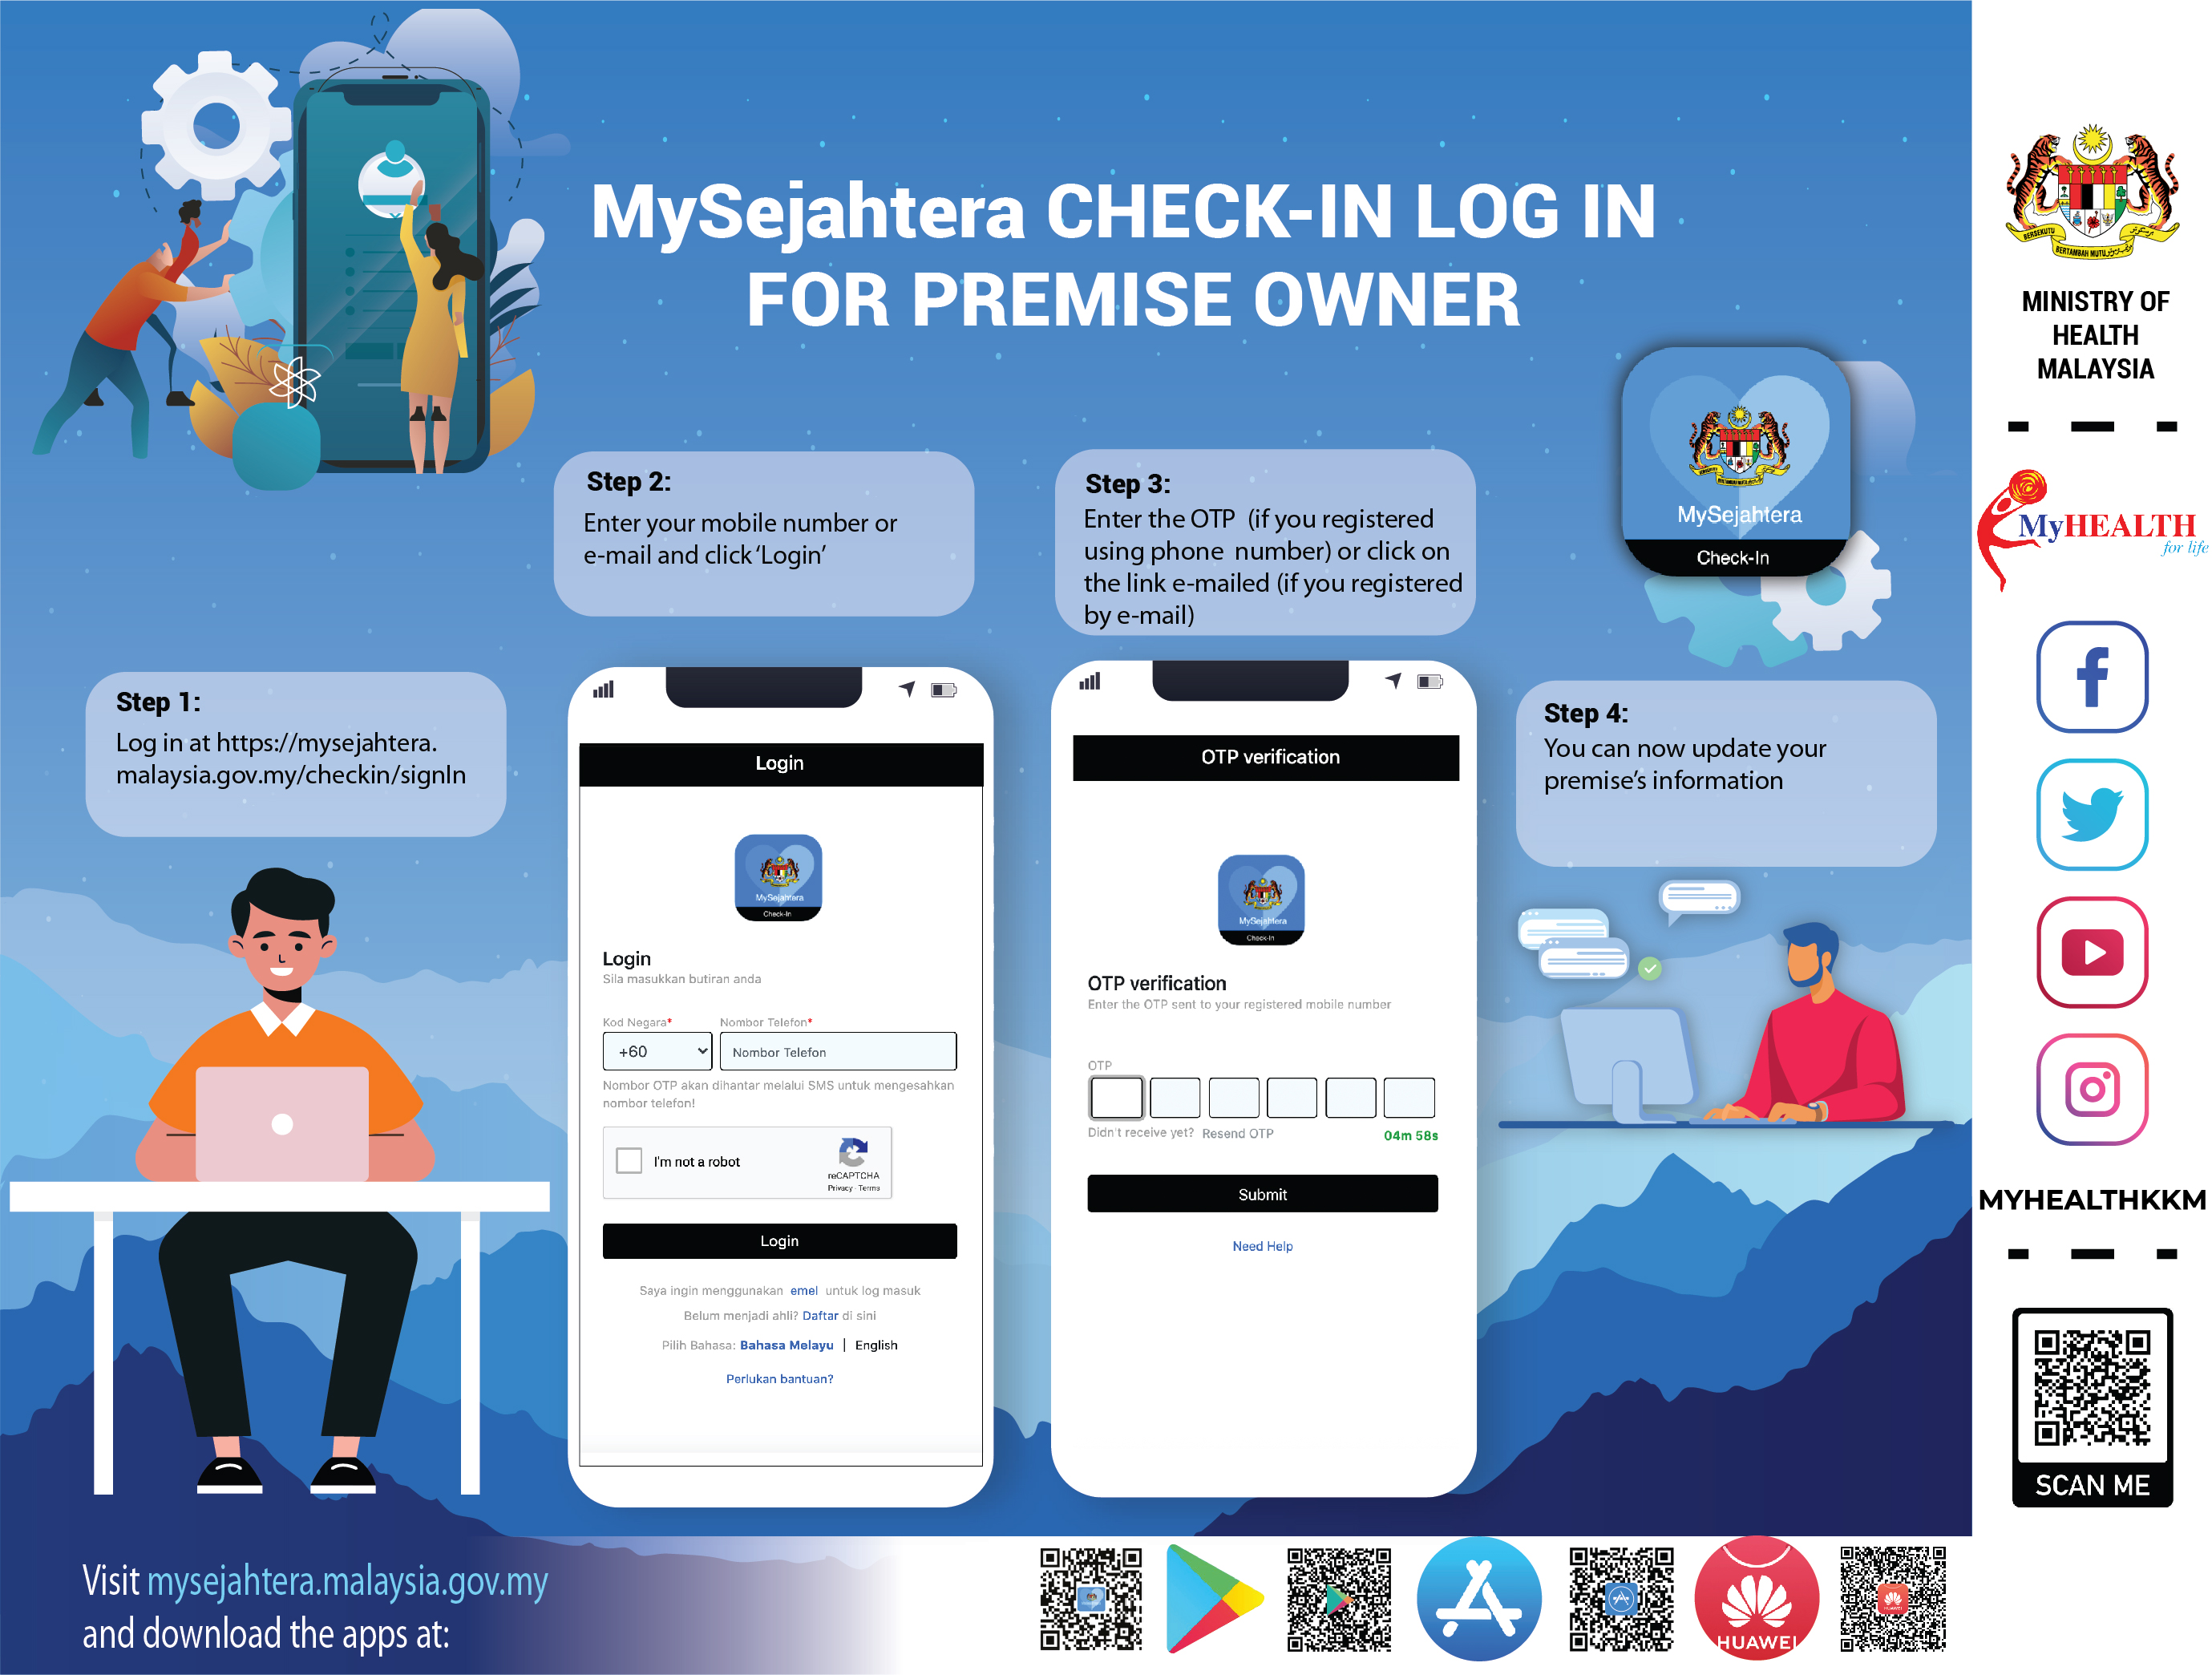 How to check mysejahtera id number